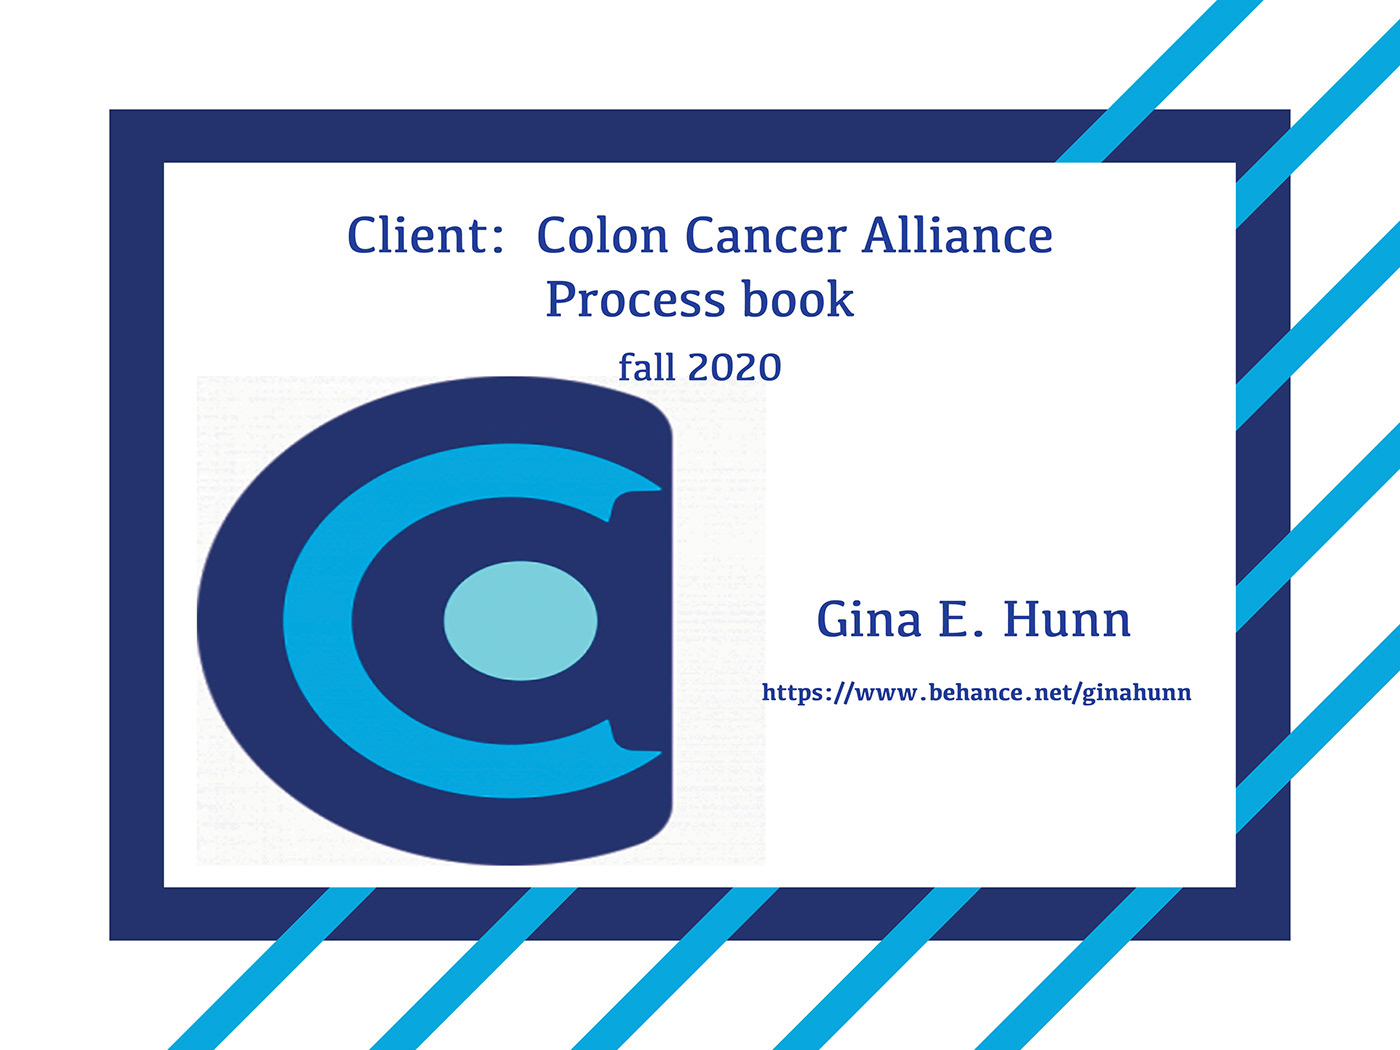 This is my process book for Colon Cancer Alliance.  